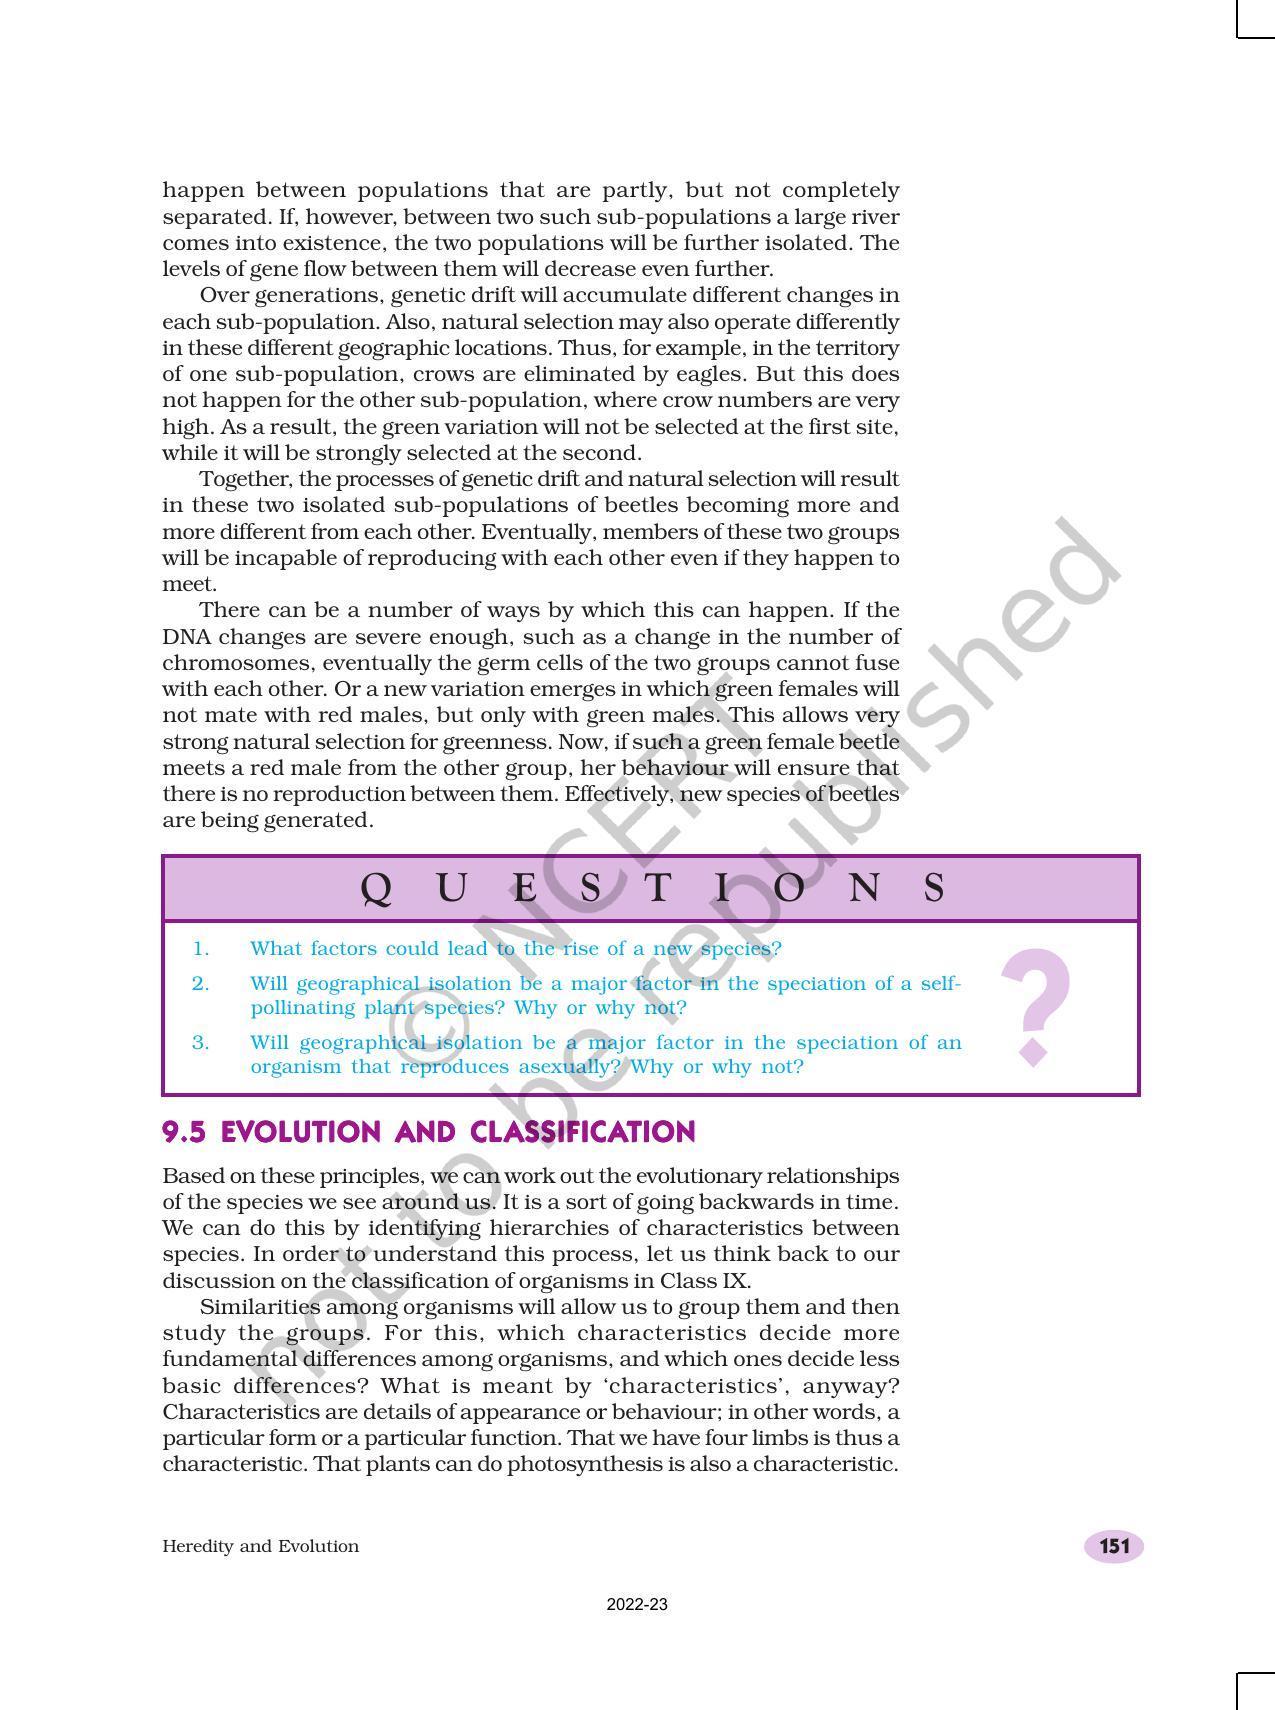 NCERT Book for Class 10 Science Chapter 9 Heredity and Evolution - Page 10